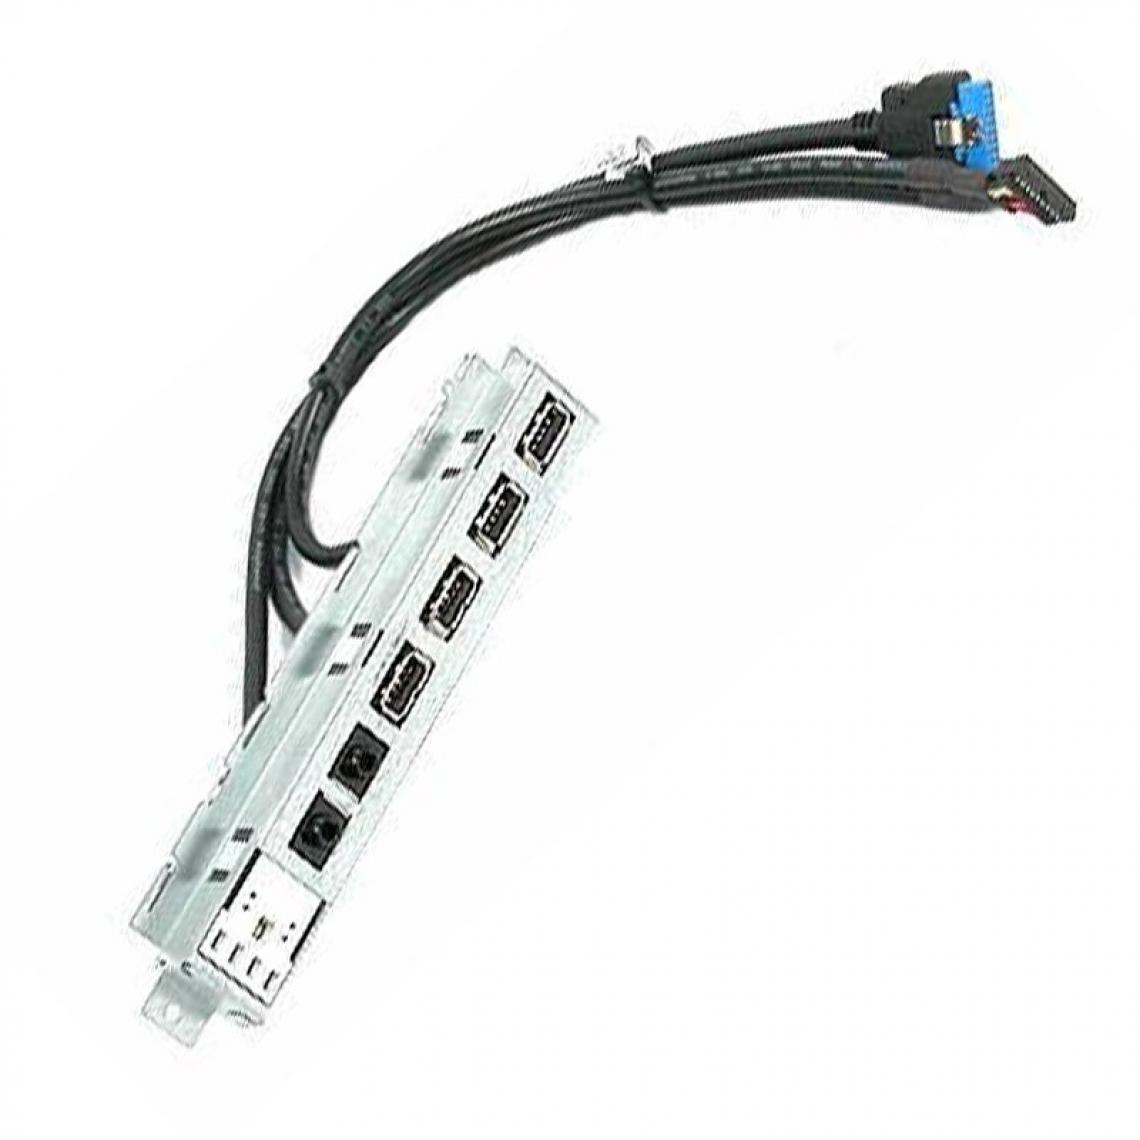 Dell - Front Panel I/O Dell 04C7PH 4C7PH 4x USB Audio IN/OUT Optiplex 7010 9010 DT - Boitier PC